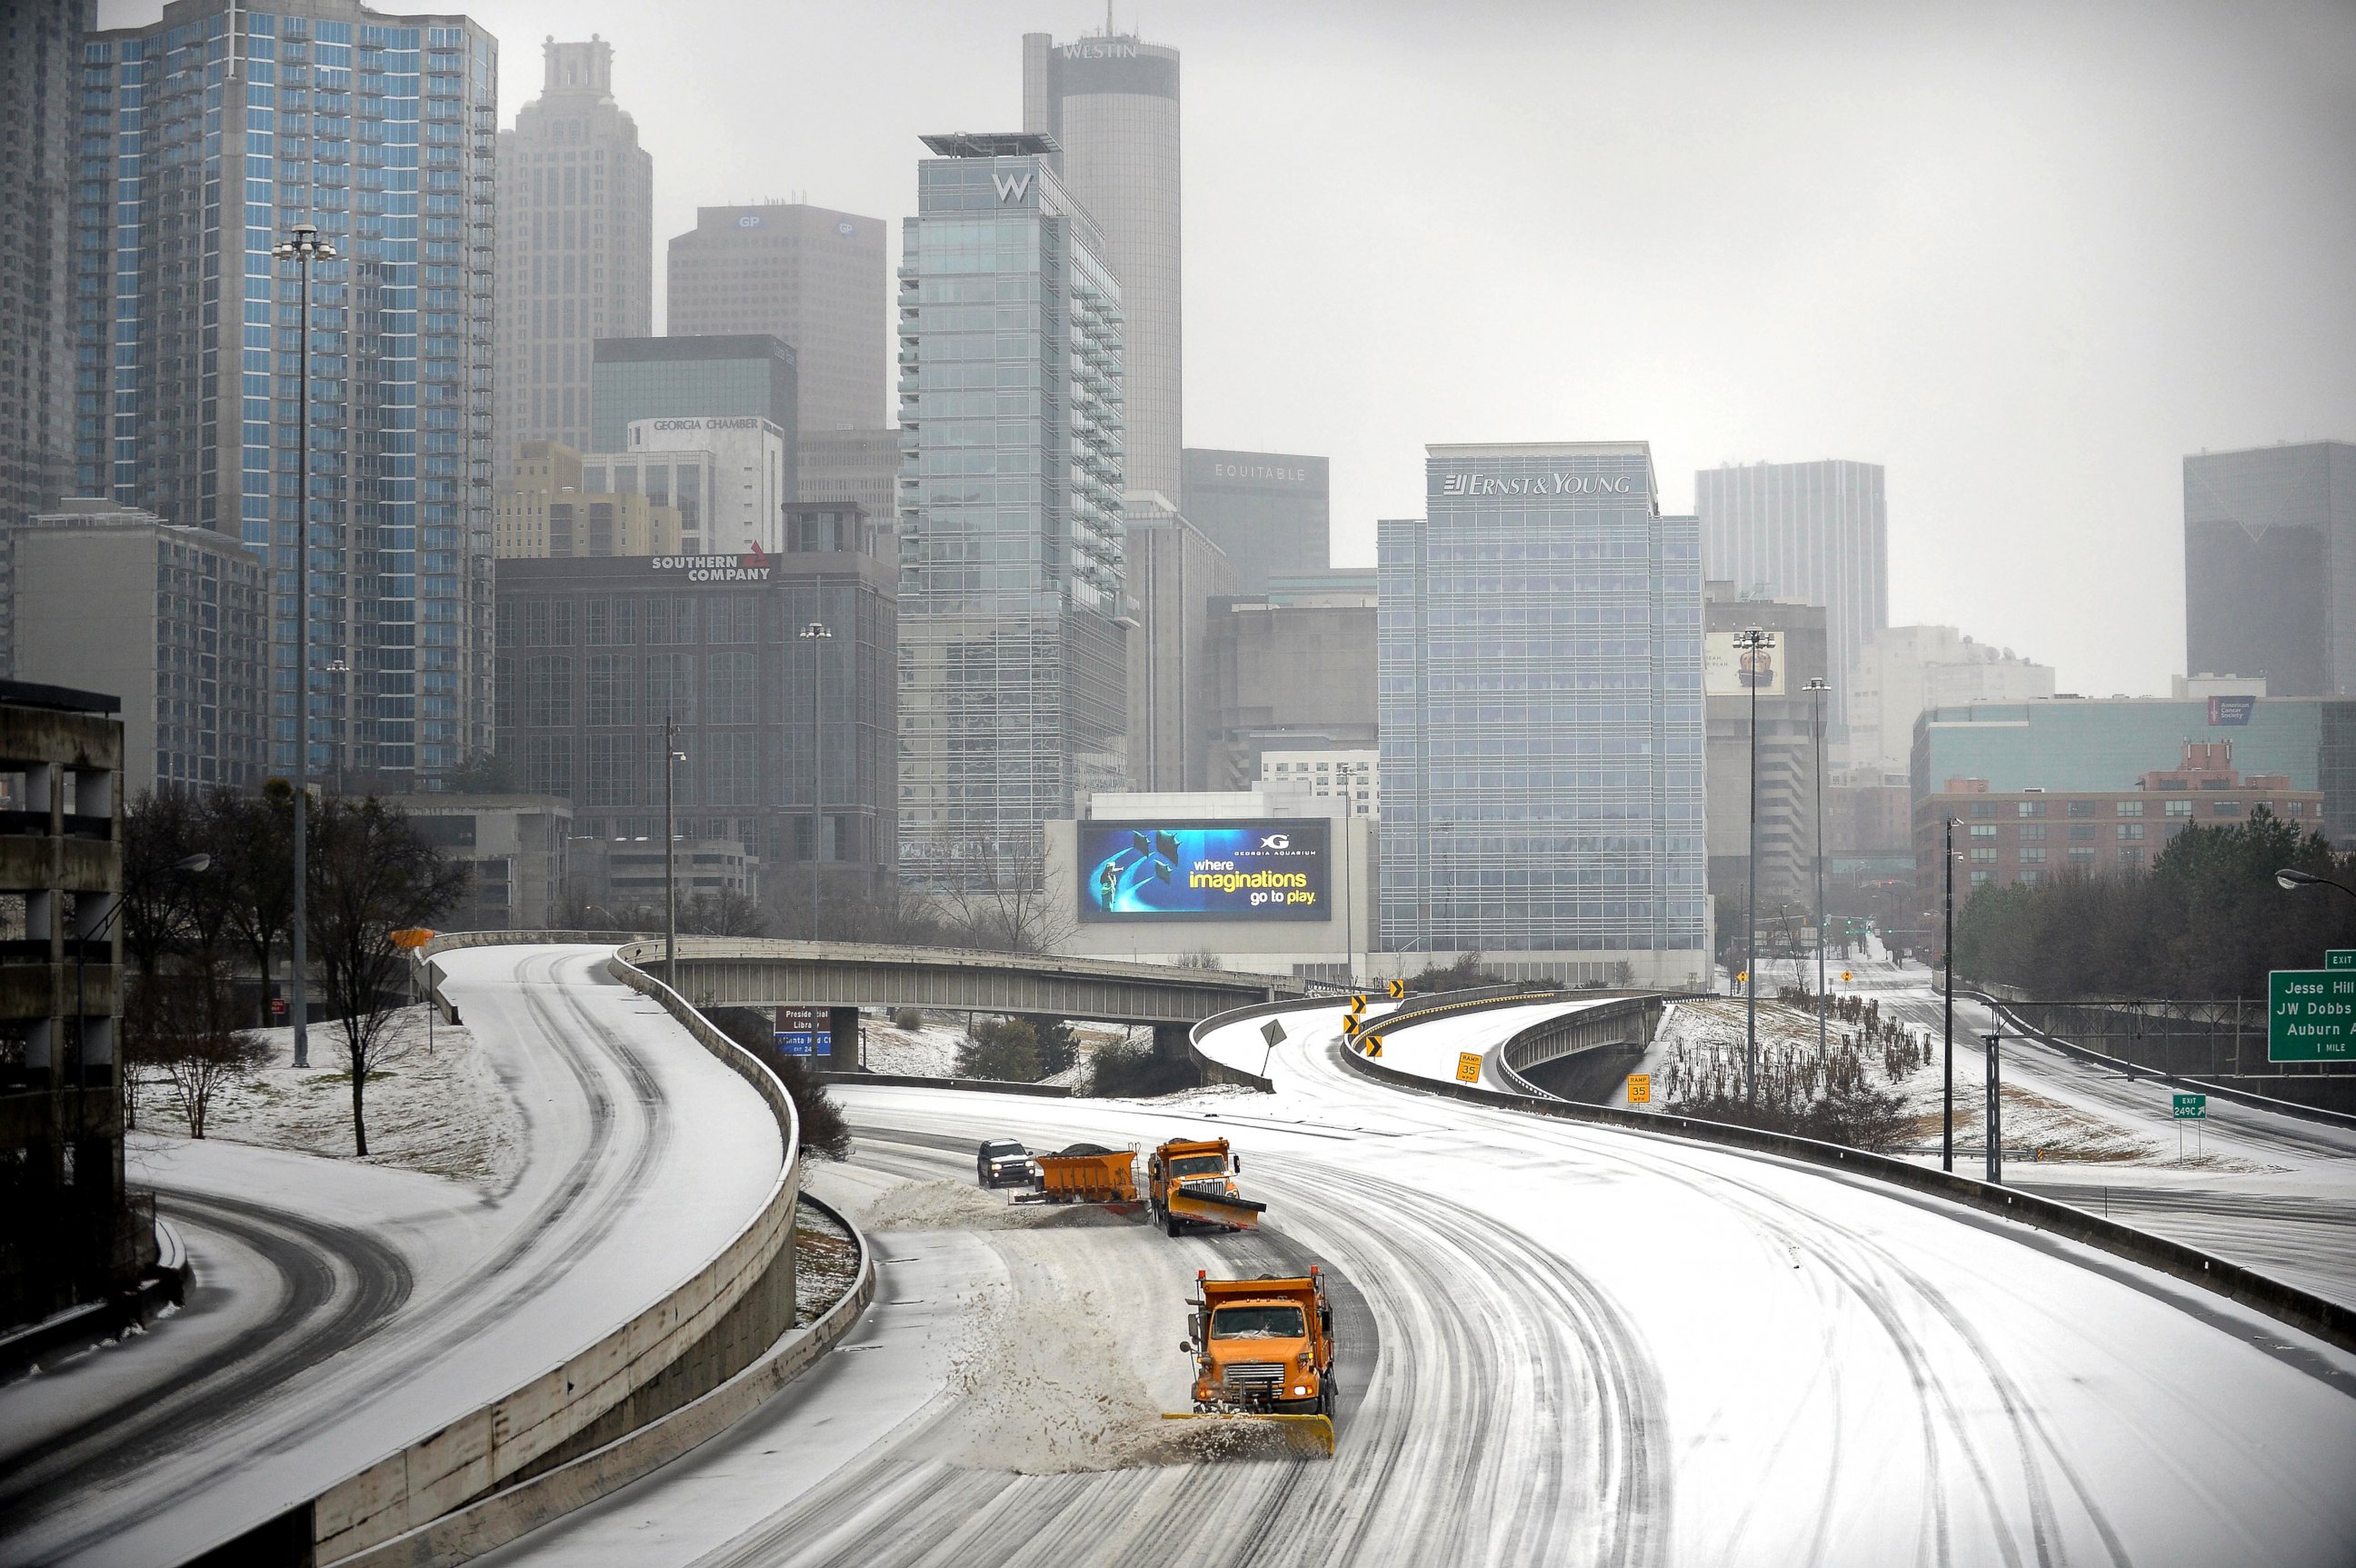 PHOTO: Snow plows clear Interstate 75/85 on the downtown connector while transportation and business grinds to a halt during a winter storm, Feb. 12, 2014, in Atlanta.